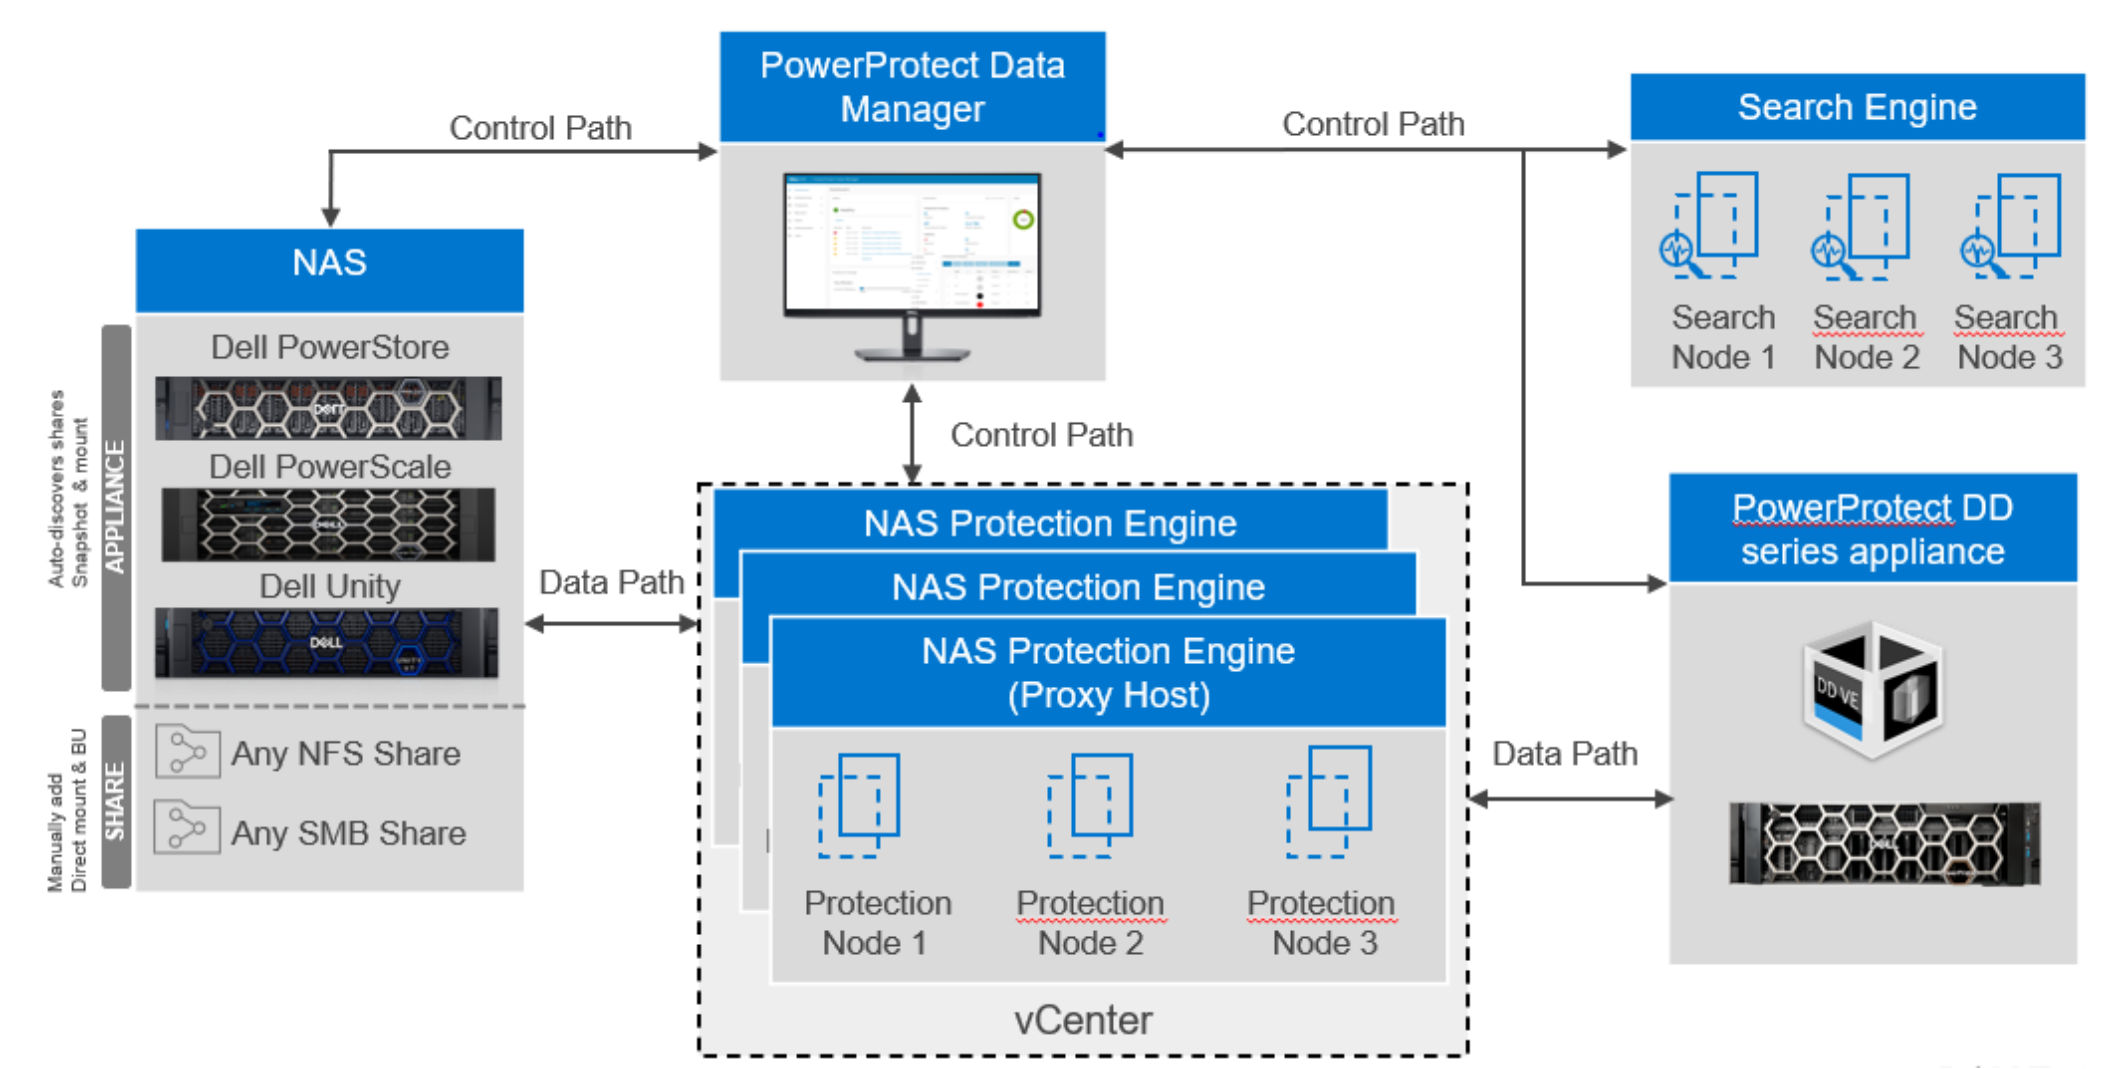 Powerprotect Data manager for NAS workflow overview.